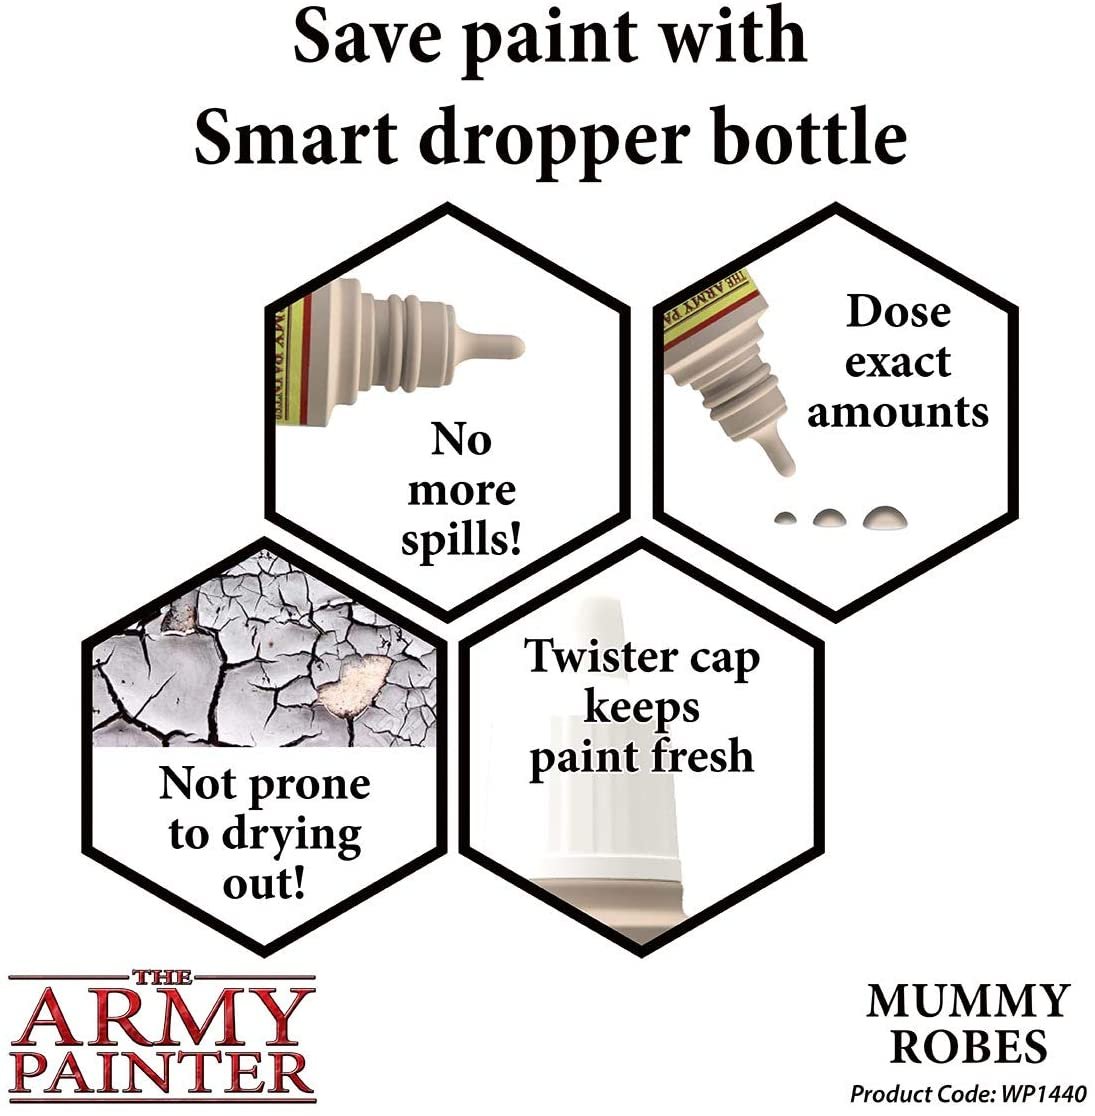 The Army Painter - Warpaints: Mummy Robes (18ml/0.6oz)